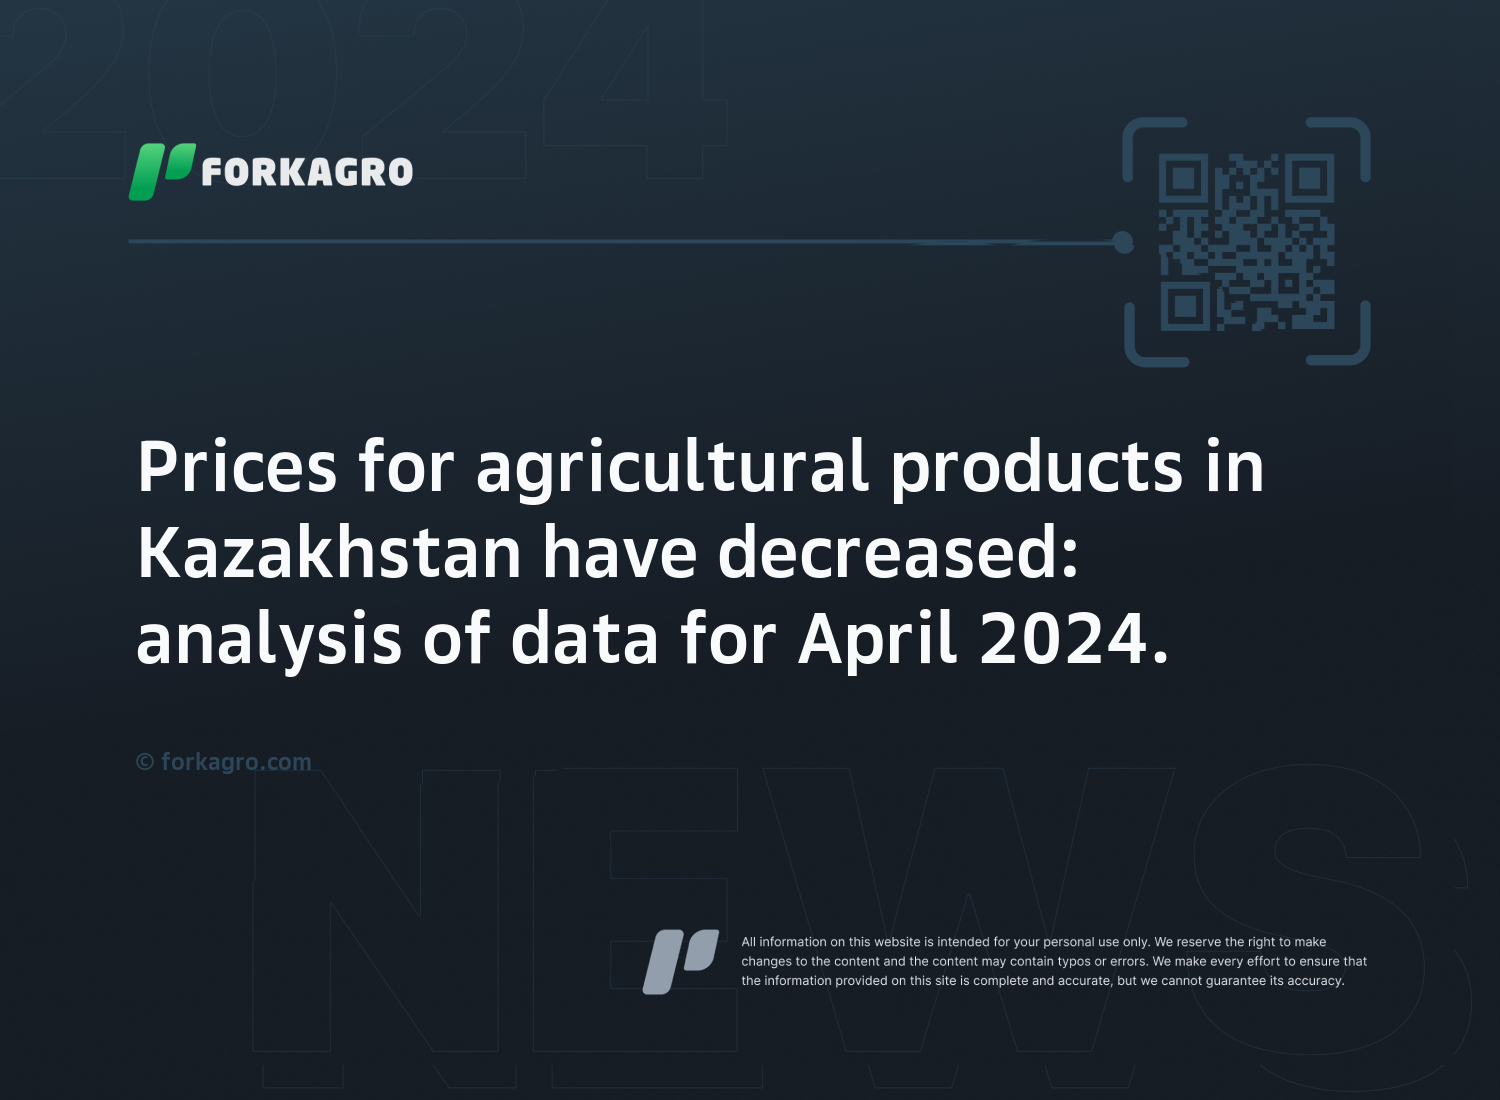 Prices for agricultural products in Kazakhstan have decreased: analysis of data for April 2024.